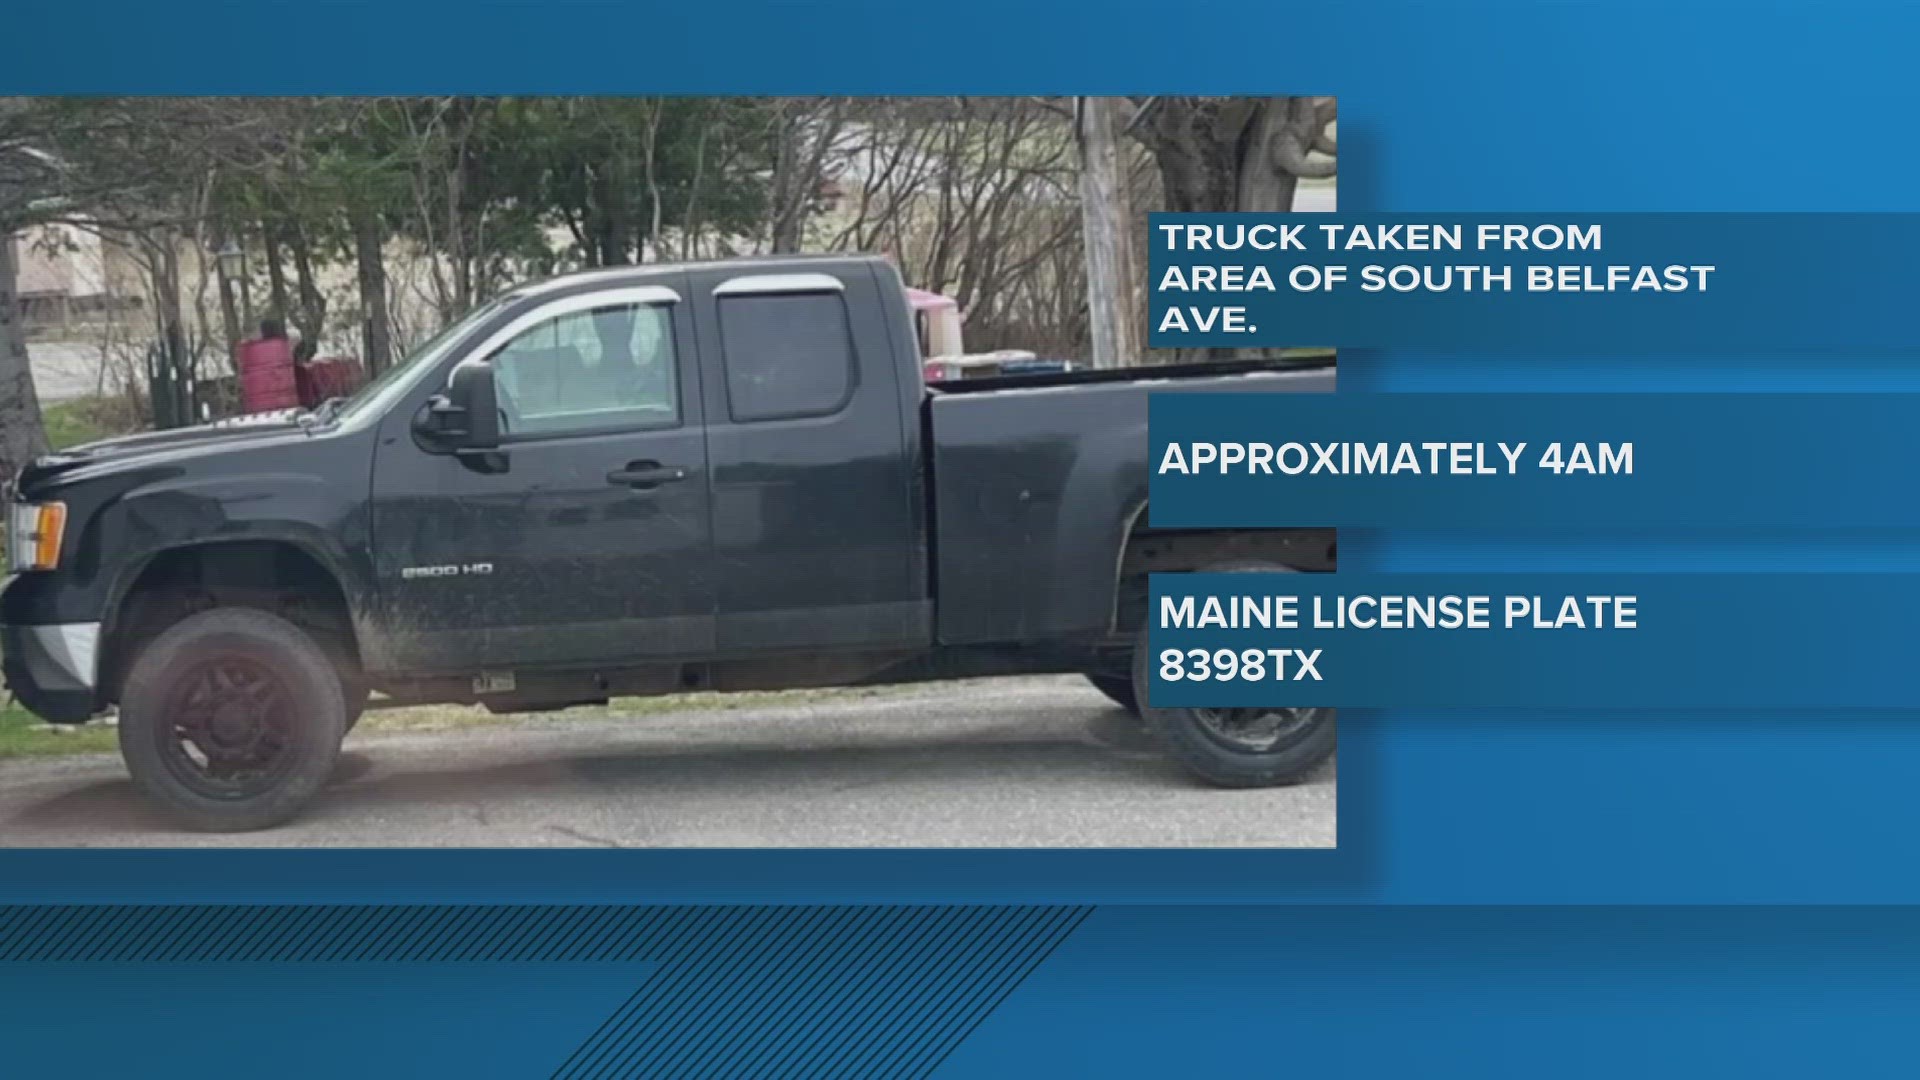 Police said the truck’s Maine registration plate is 8398TX.